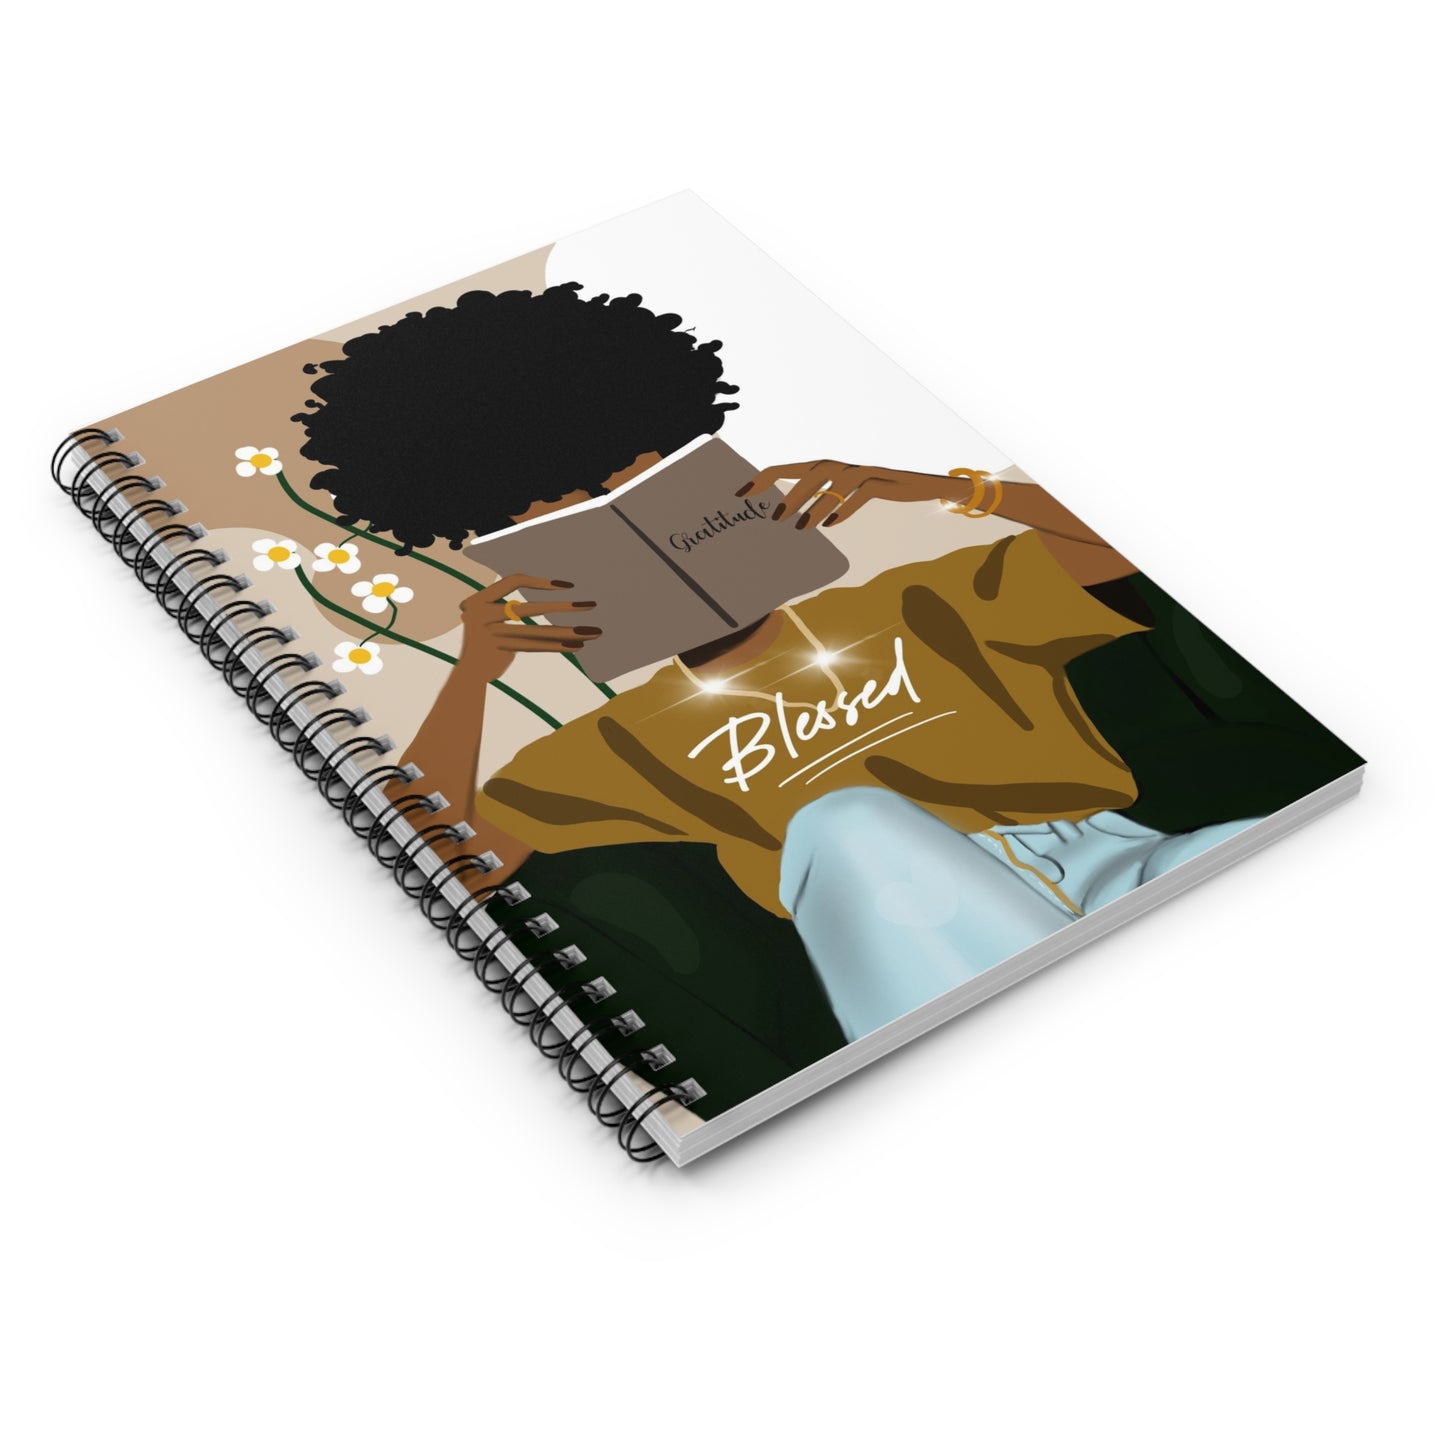 Blessed Spiral Notebook - Ruled Line